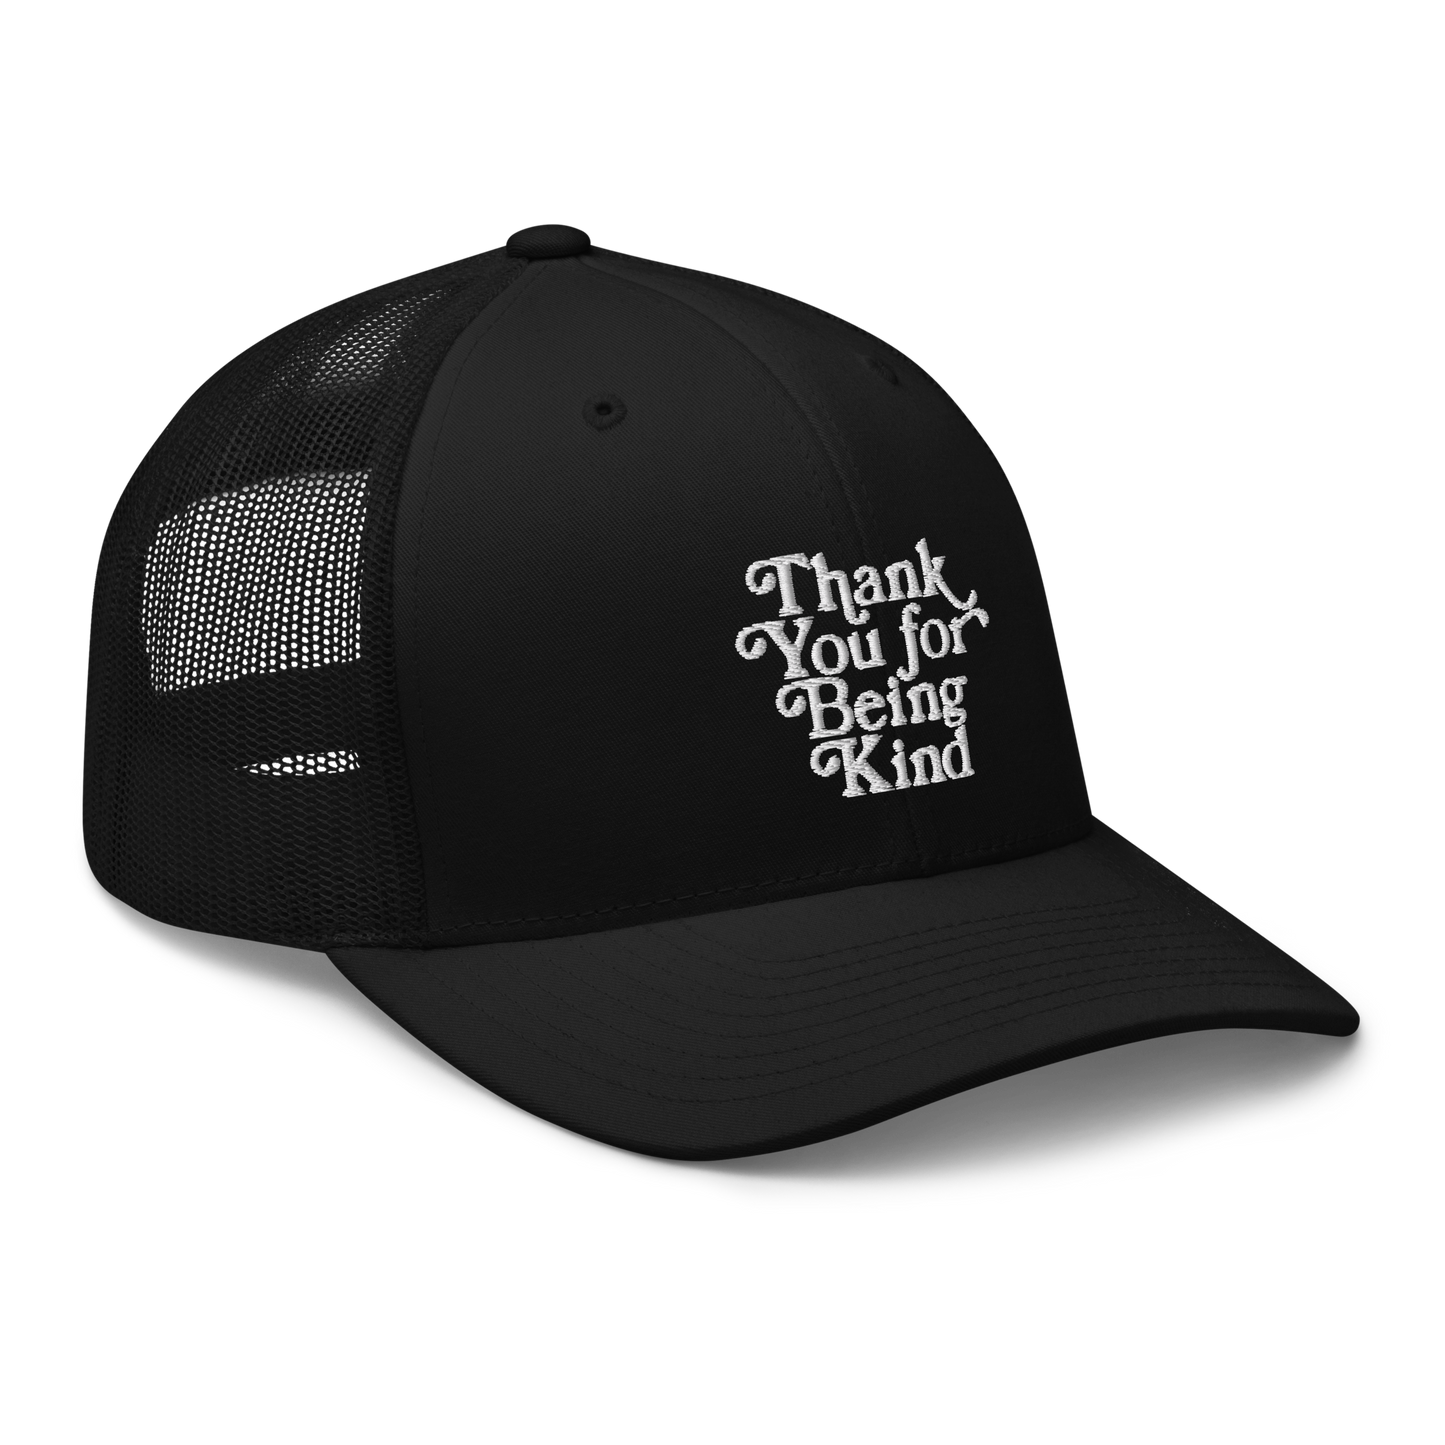 Thank You For Being Kind Trucker Cap